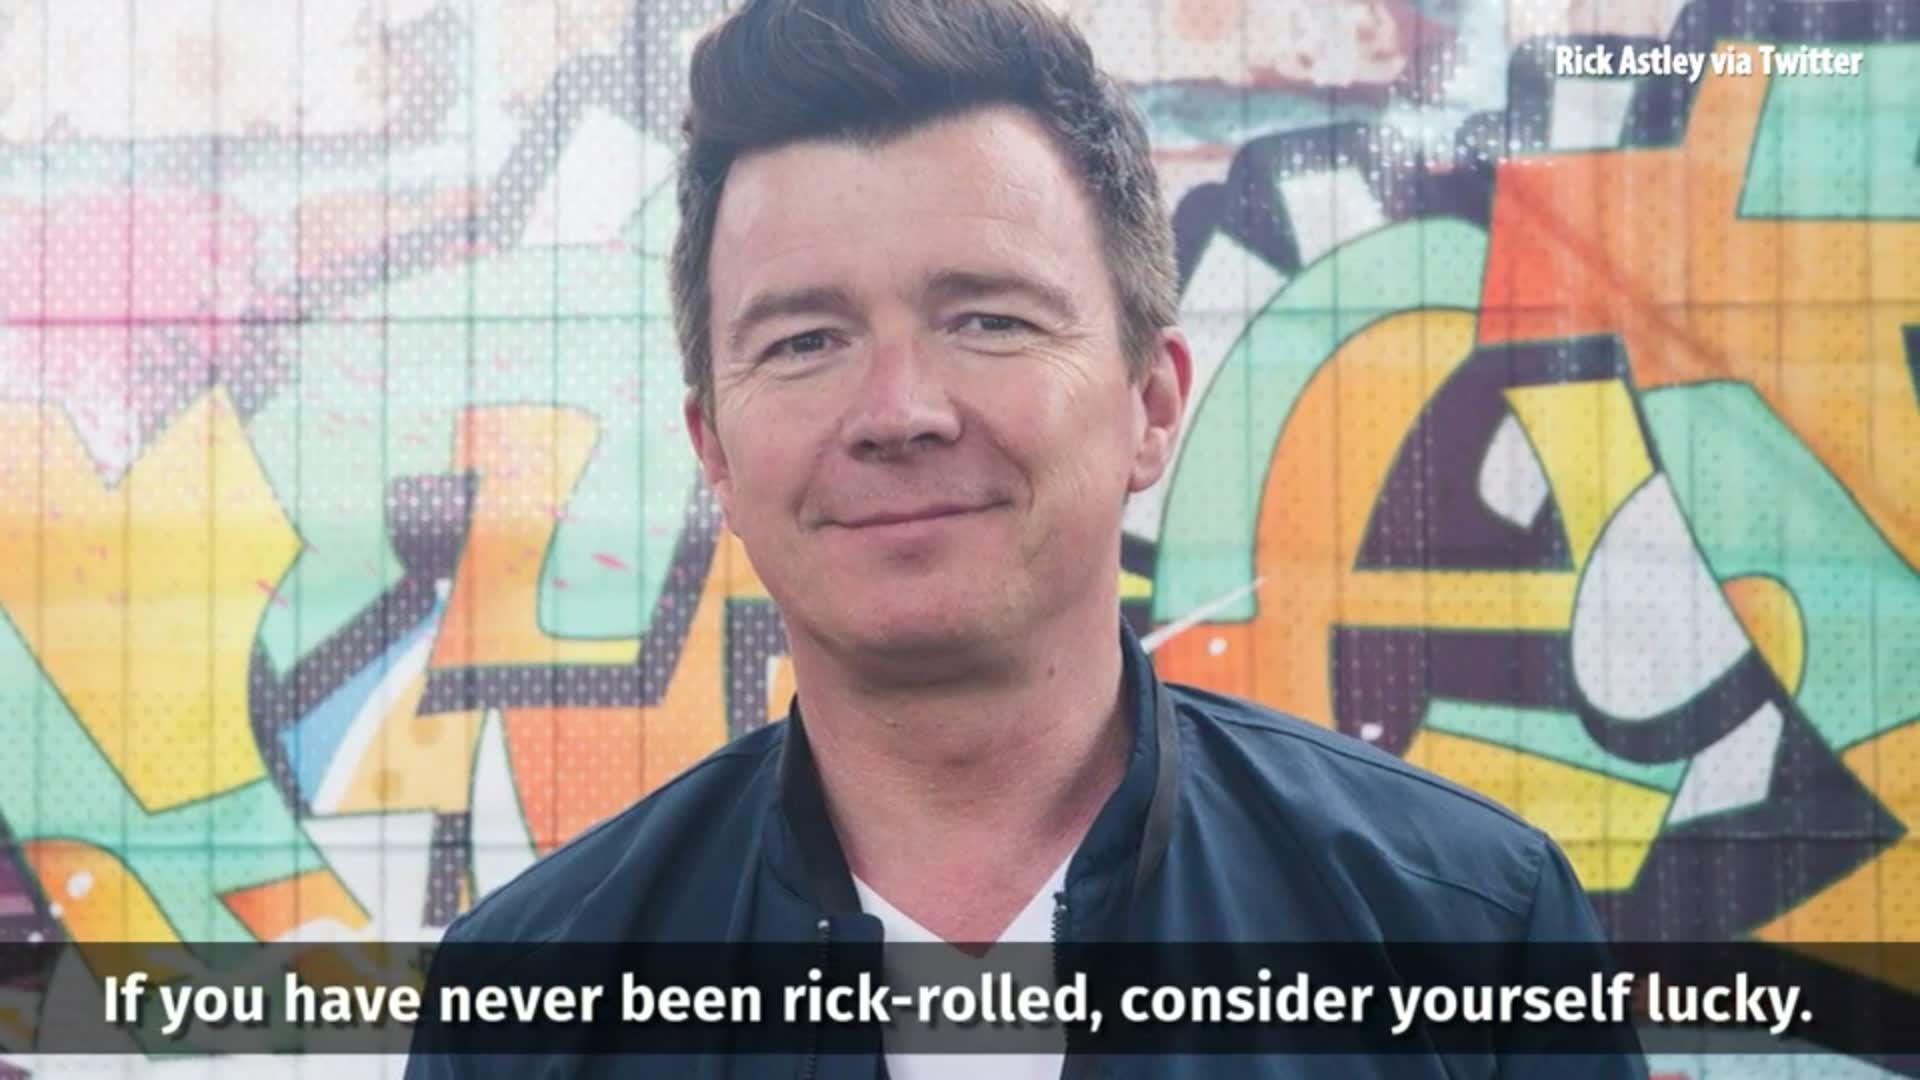 Rick Astley 'Never Gonna Give You Up' Tops 1 Billion  Views